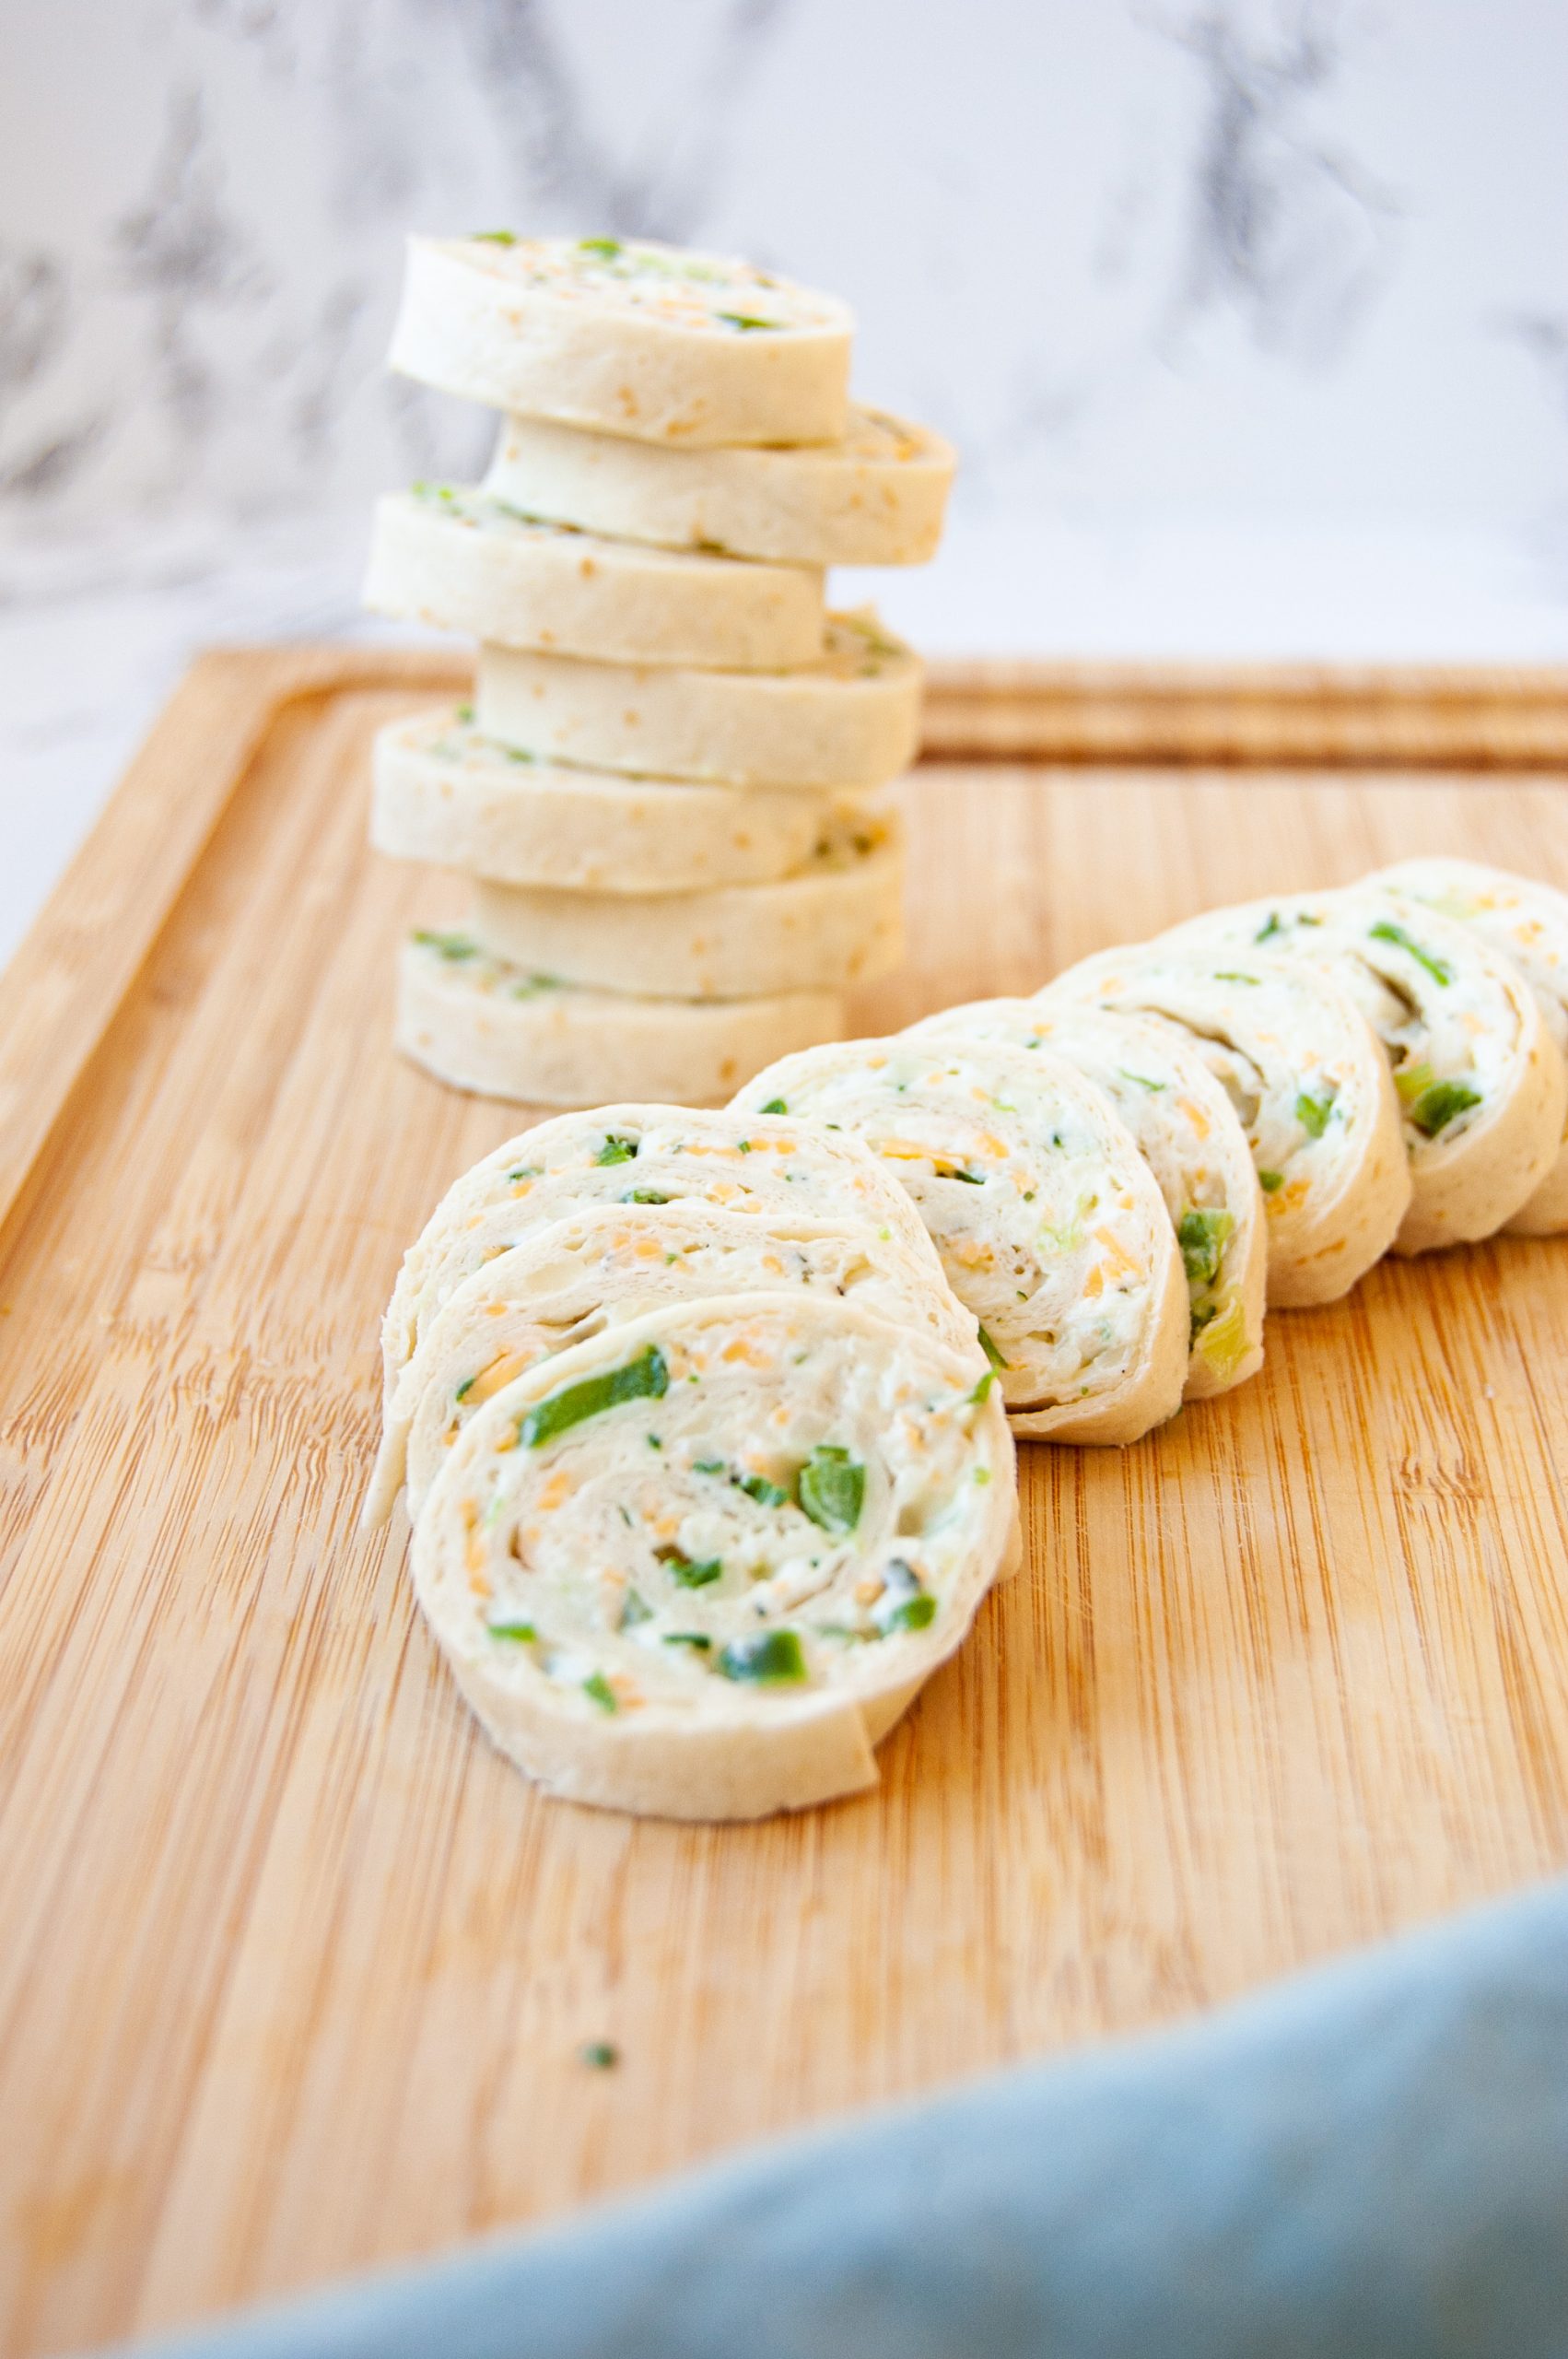 These Ranch Cream Cheese Rollups are an easy and delicious appetizer for any party! Great to make ahead and just a few simple ingredients. Whether you call them rollups or pinwheels, these are bound to be a family favorite for years to come!